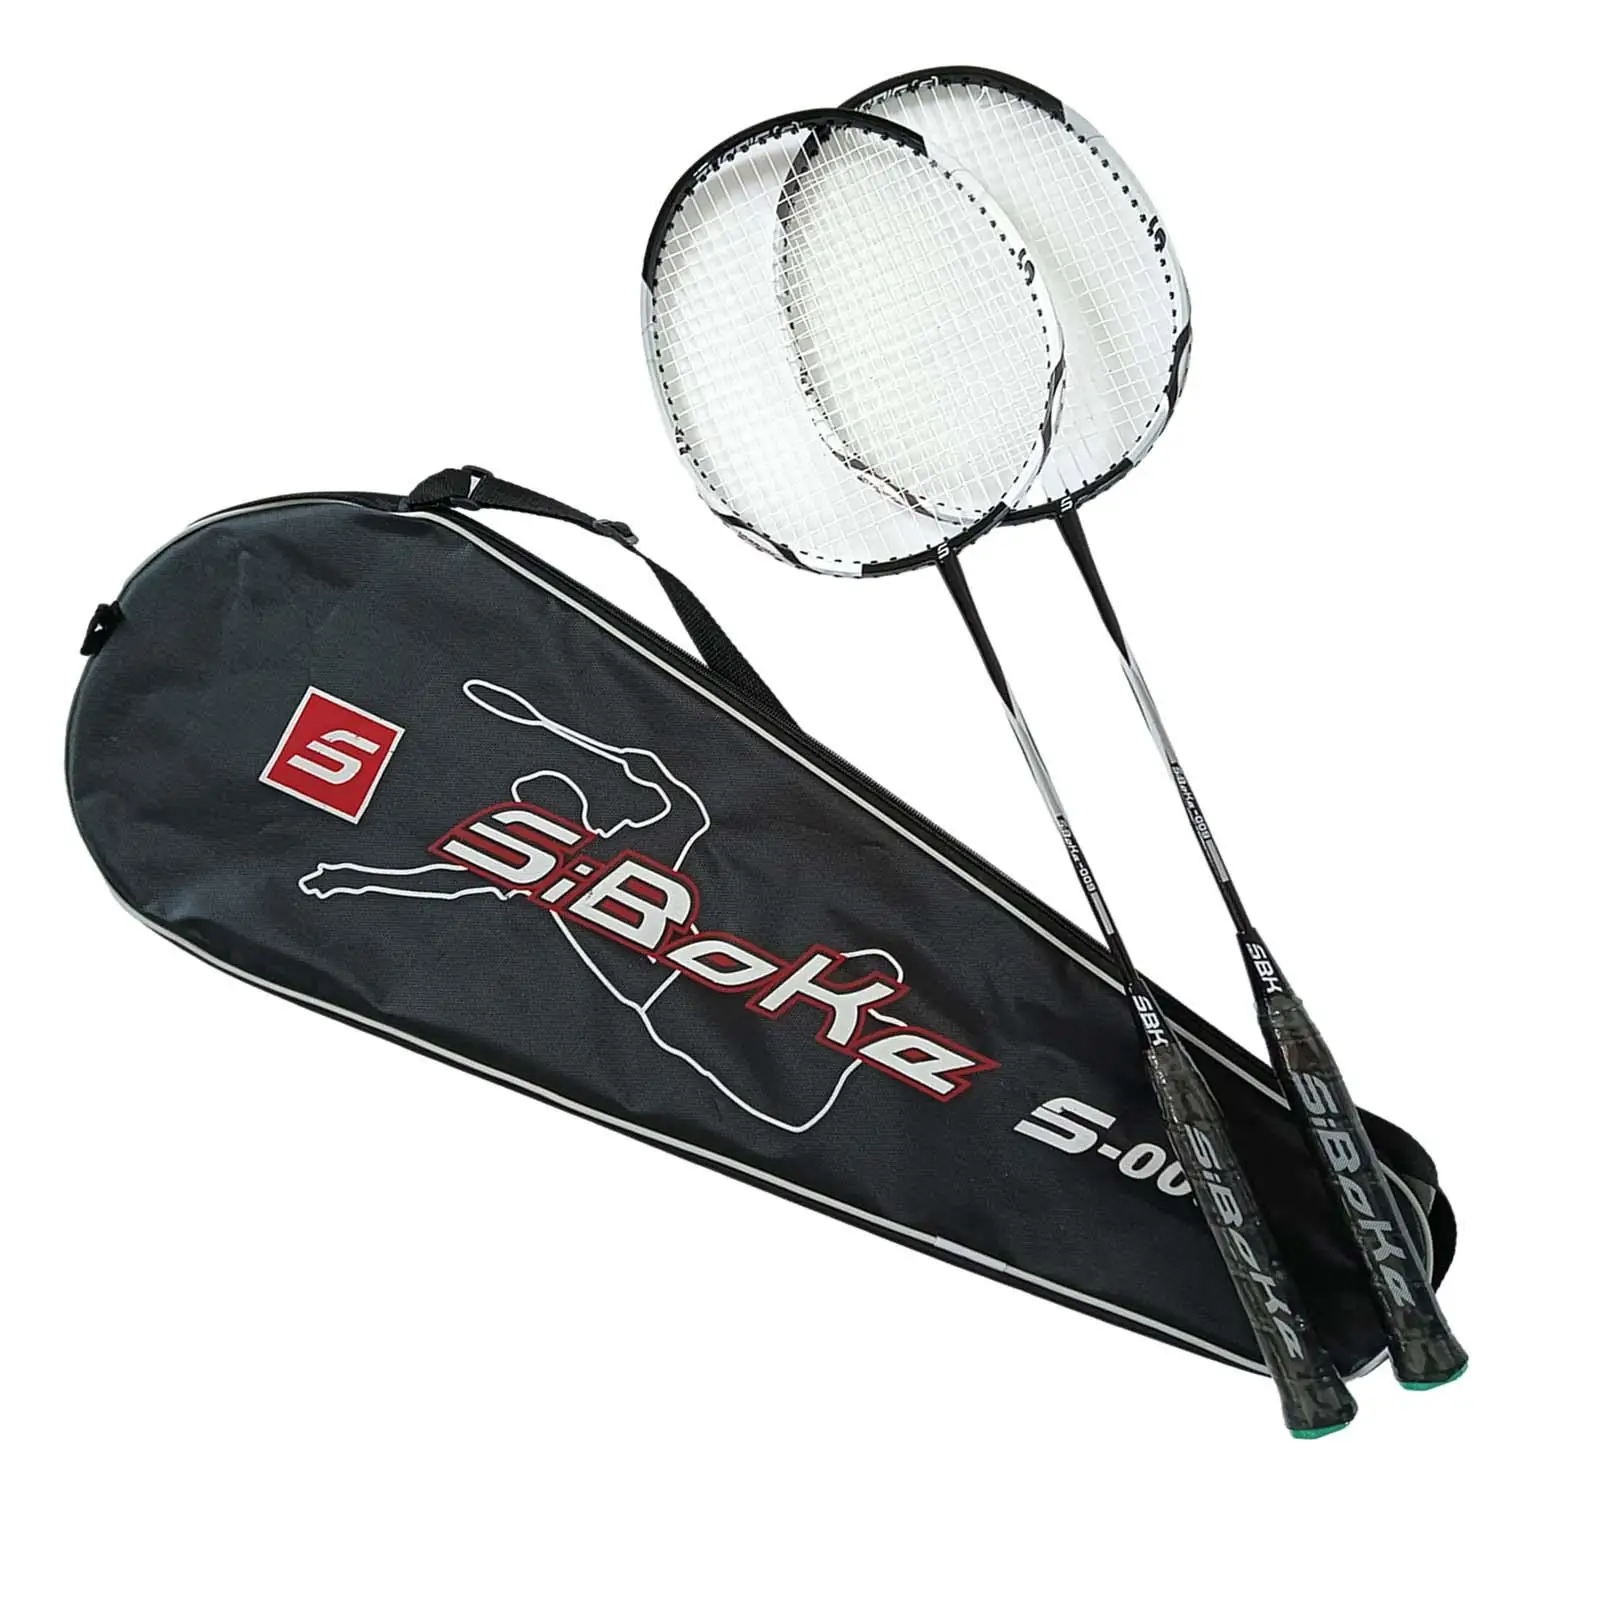 Set of 2 Badminton Rackets, Professional Badminton Rackets with Carrying Bag,